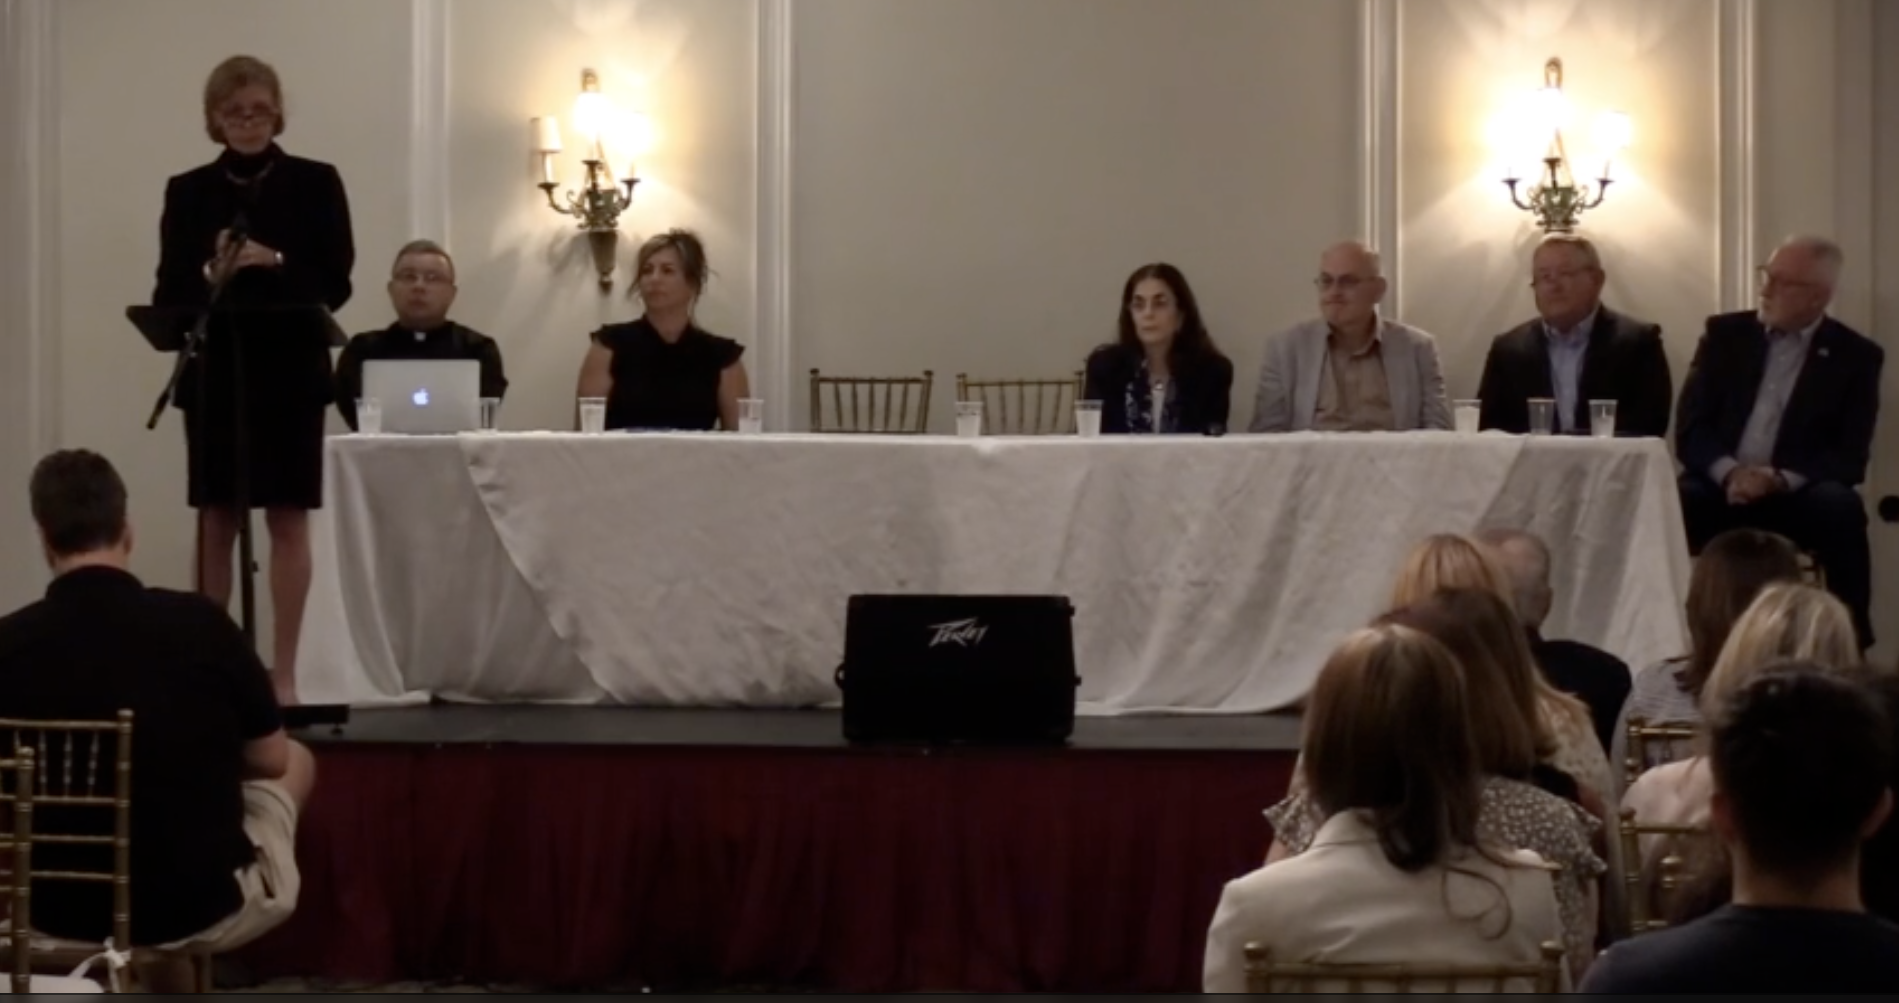 REPLAY: Miami Protection Of Children - American Conversation Featuring Dr. Paul Merrick